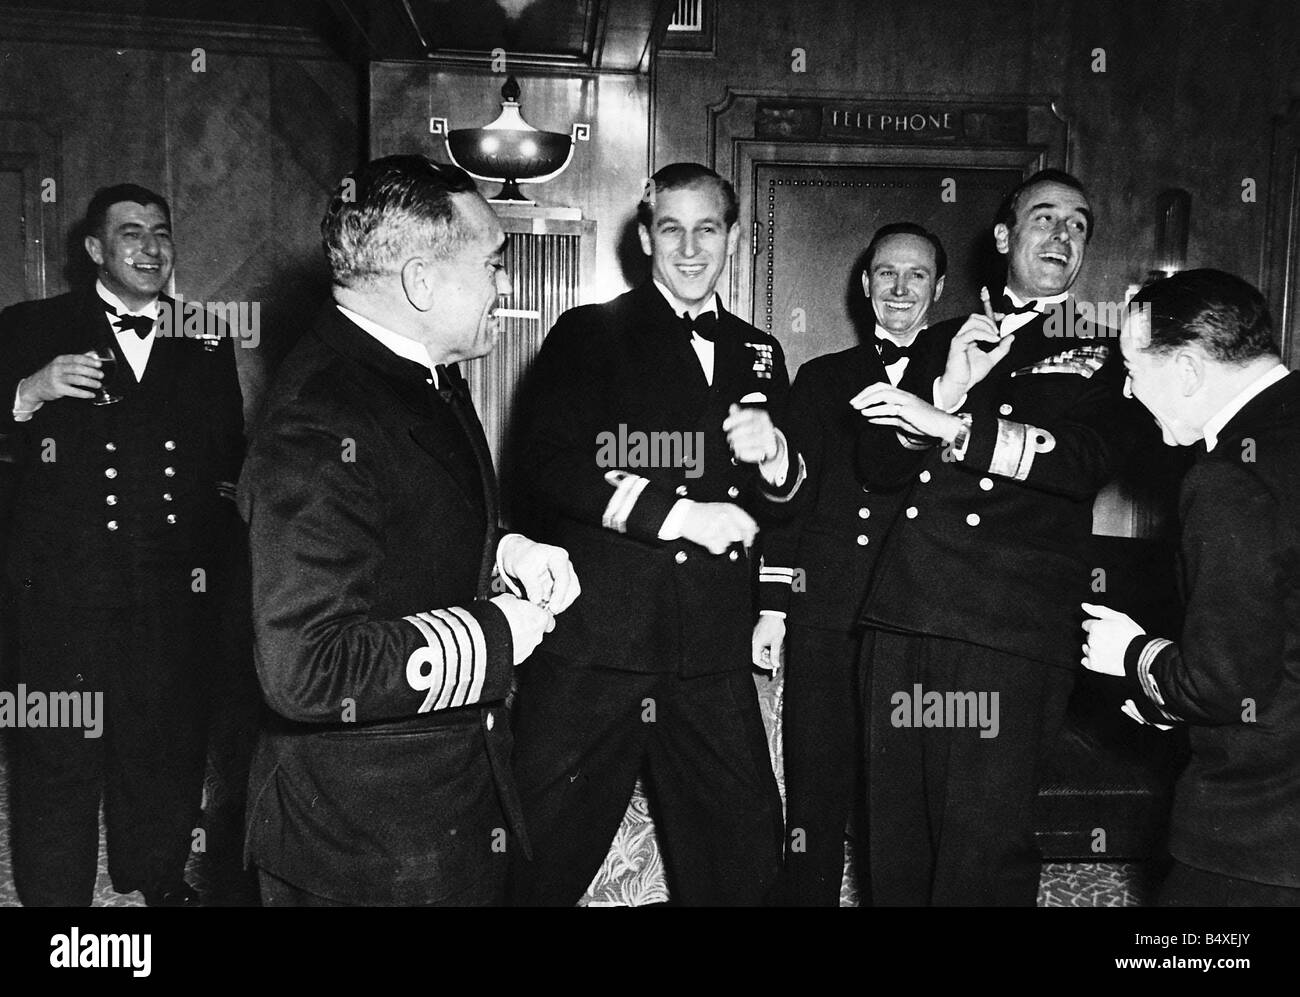 Prince Philip on the eve of his wedding with his Naval colleagues having a laugh With him is his uncle Earl Mountbatten holding Stock Photo